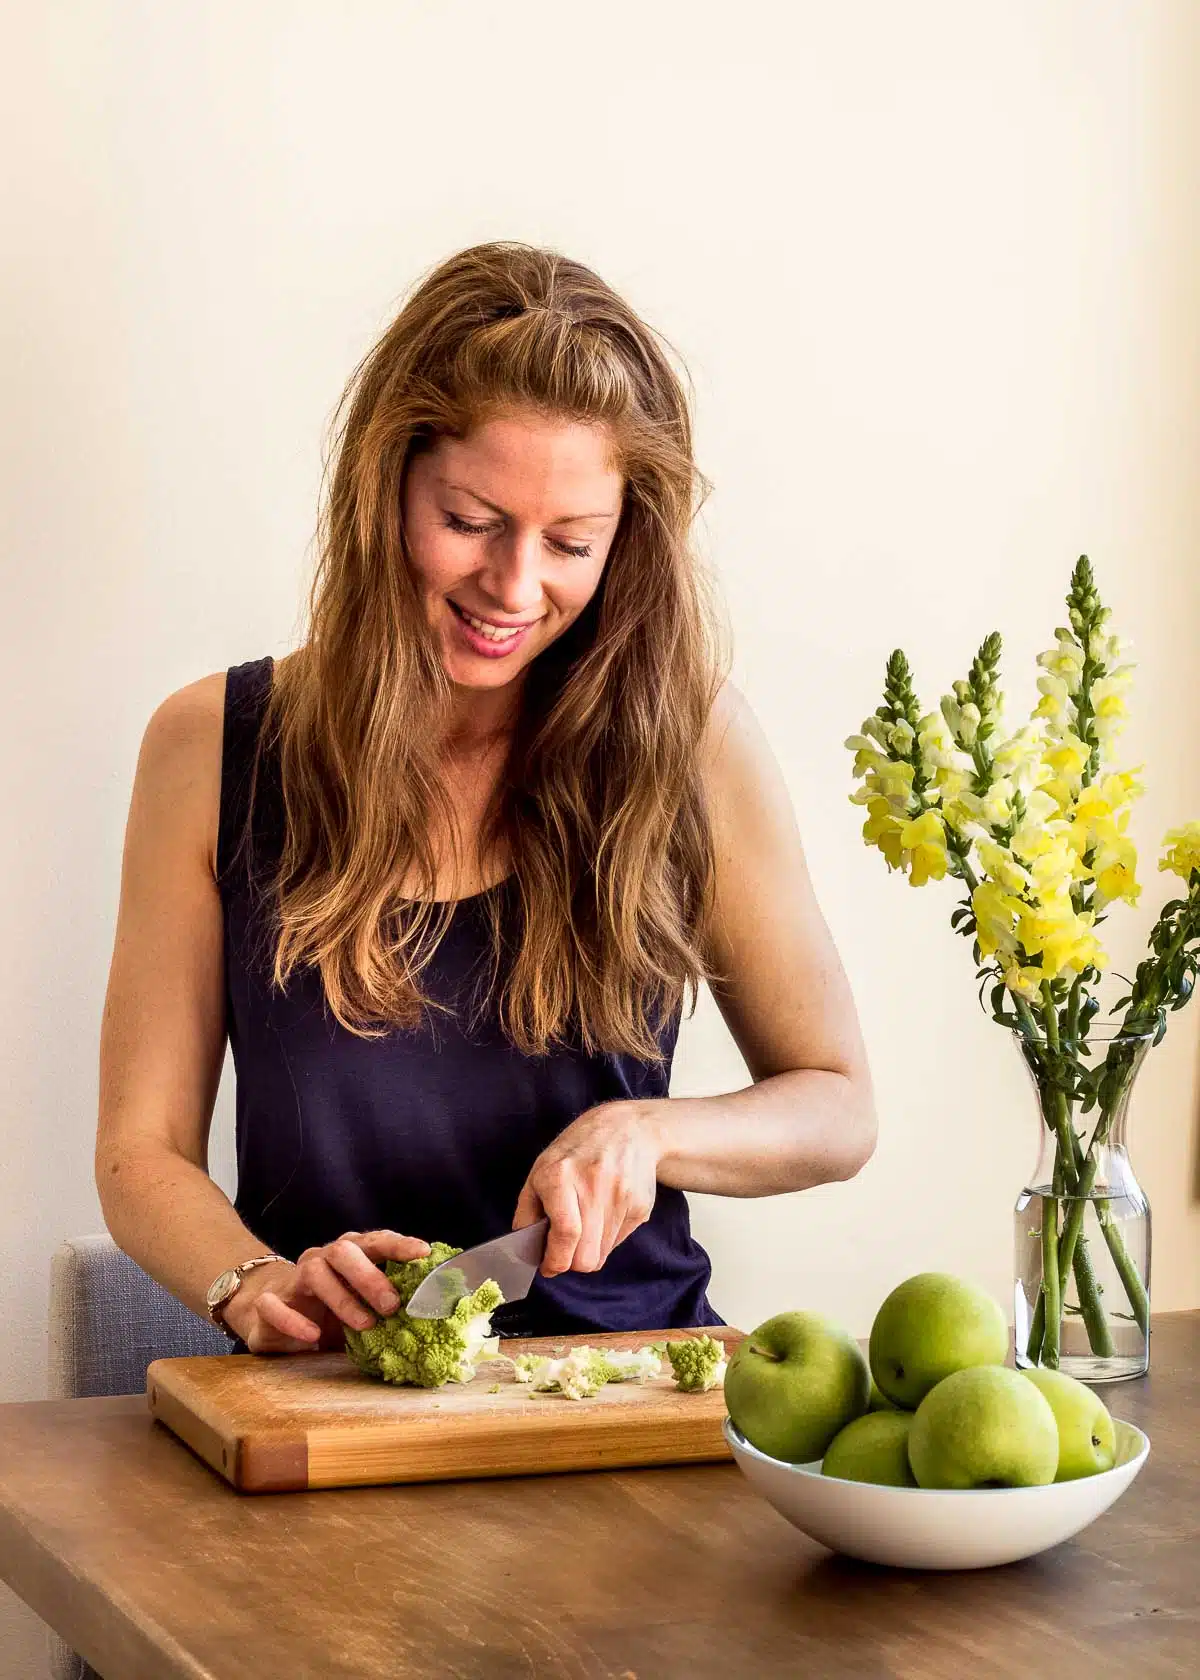 Elizabeth Emery of Vancouver with Love sitting at a kitchen table chopping up vegetables.